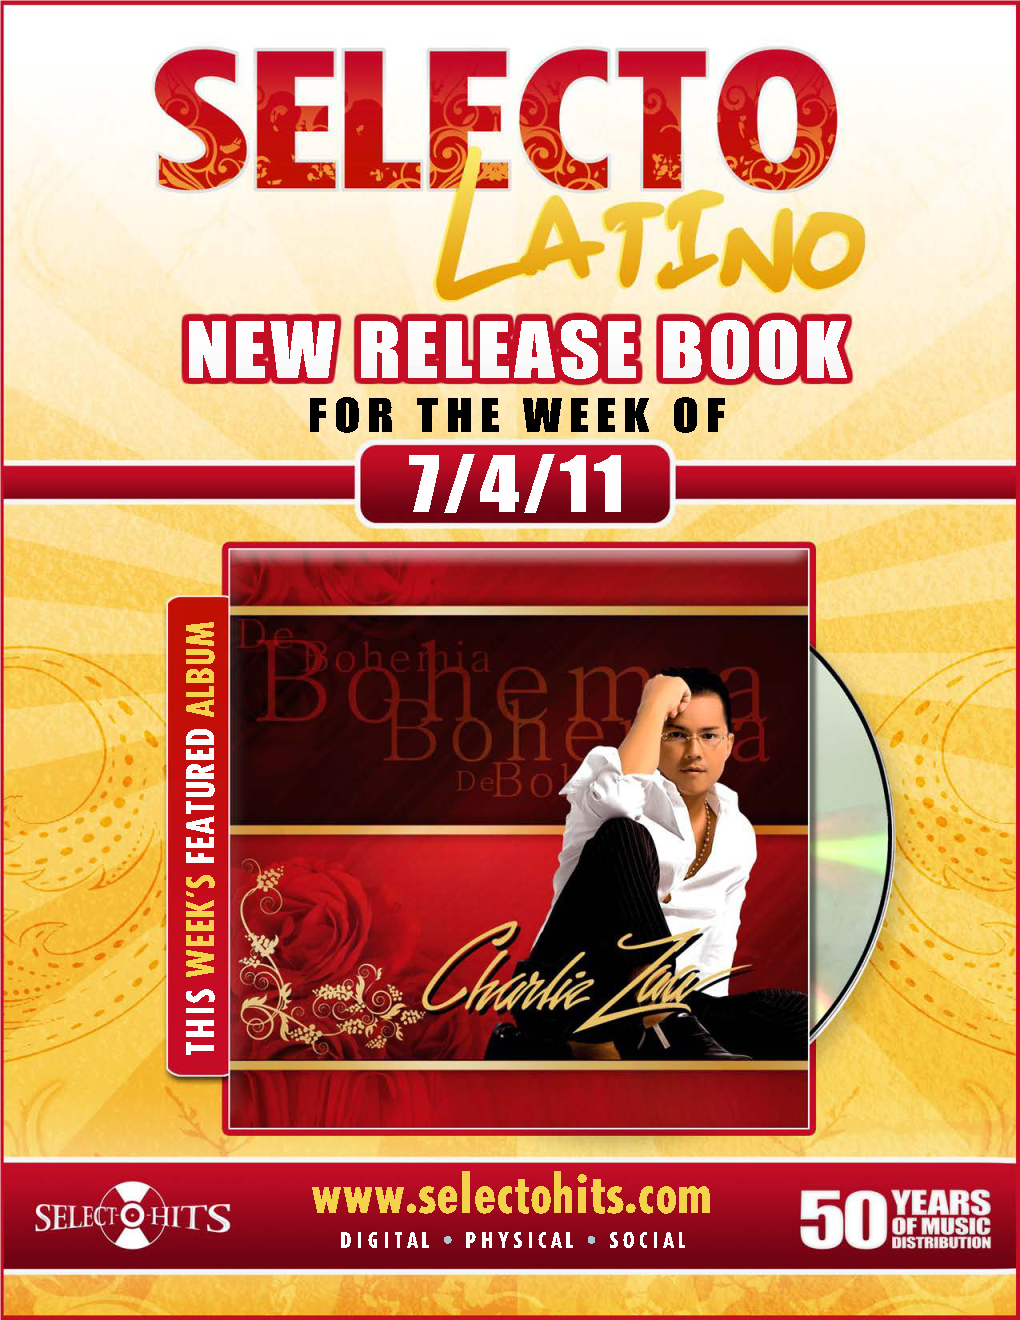 7/4/11 New Release Book